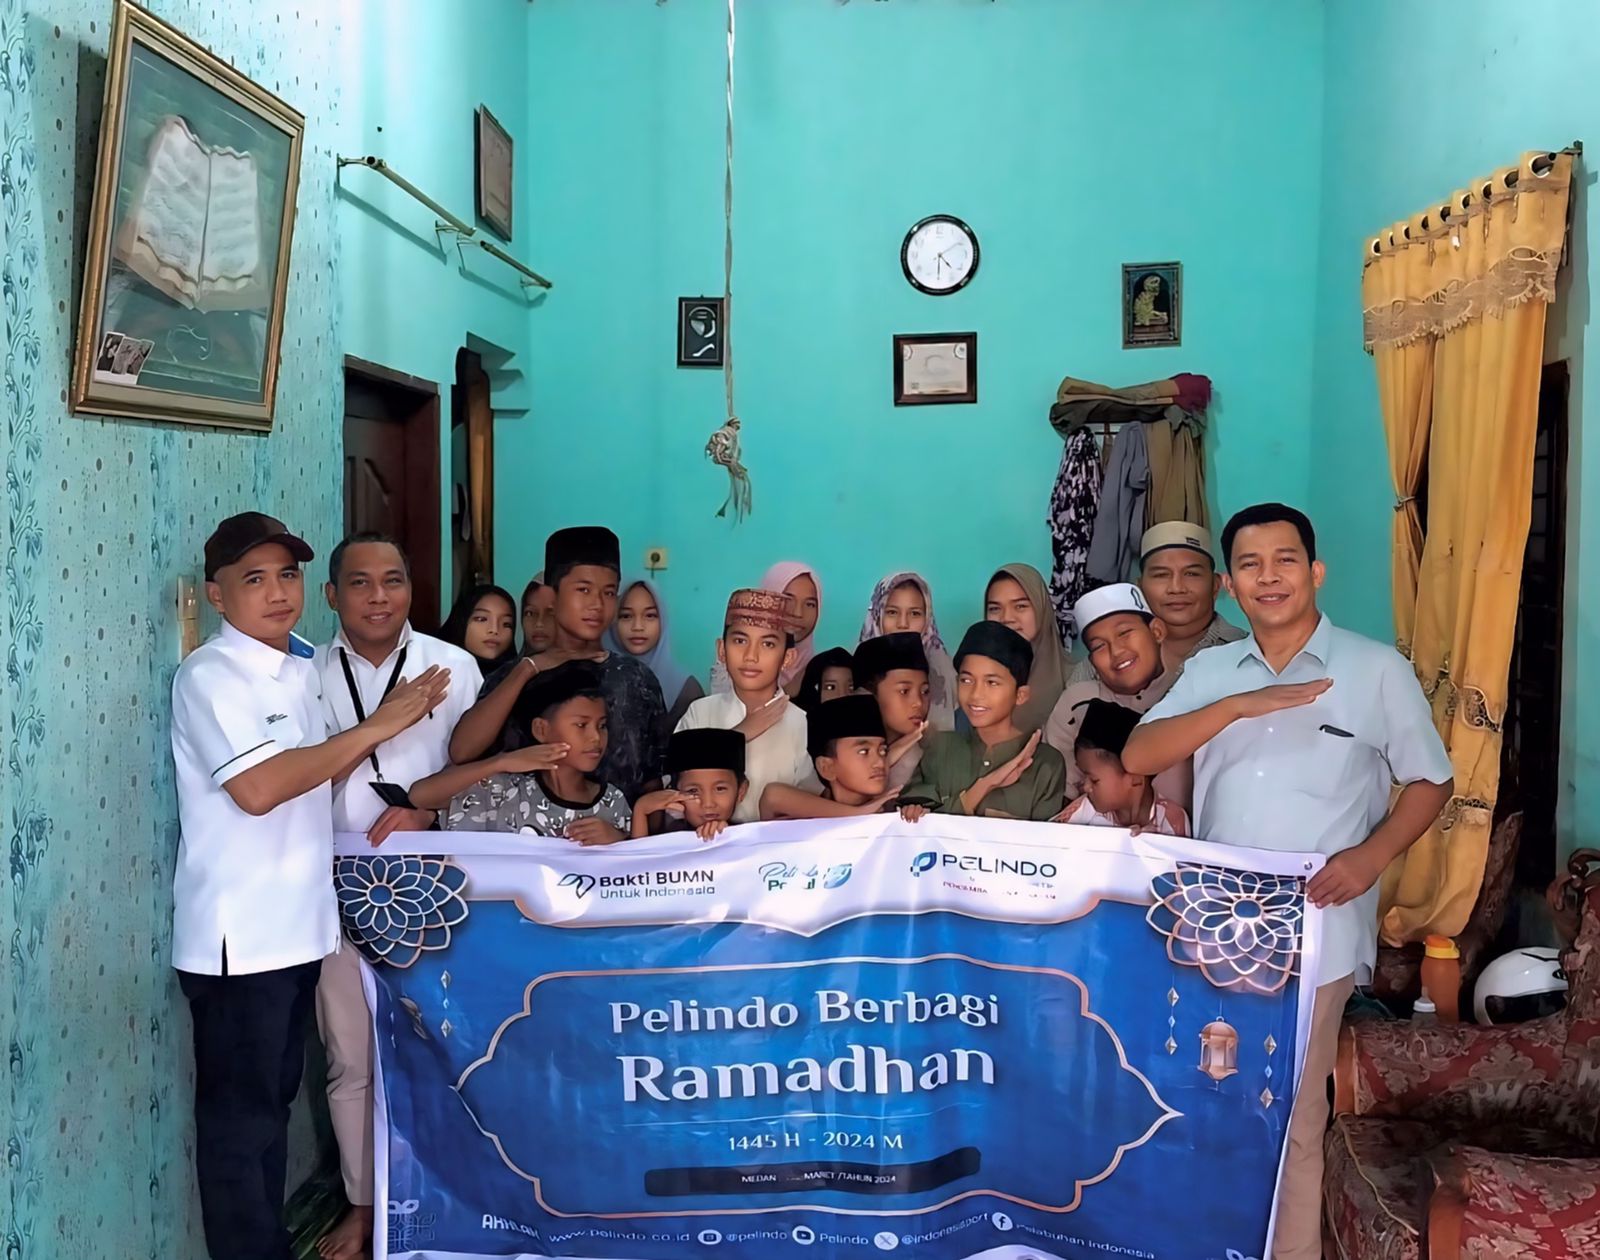 Achieve Blessings with Pelindo Sharing Ramadhan